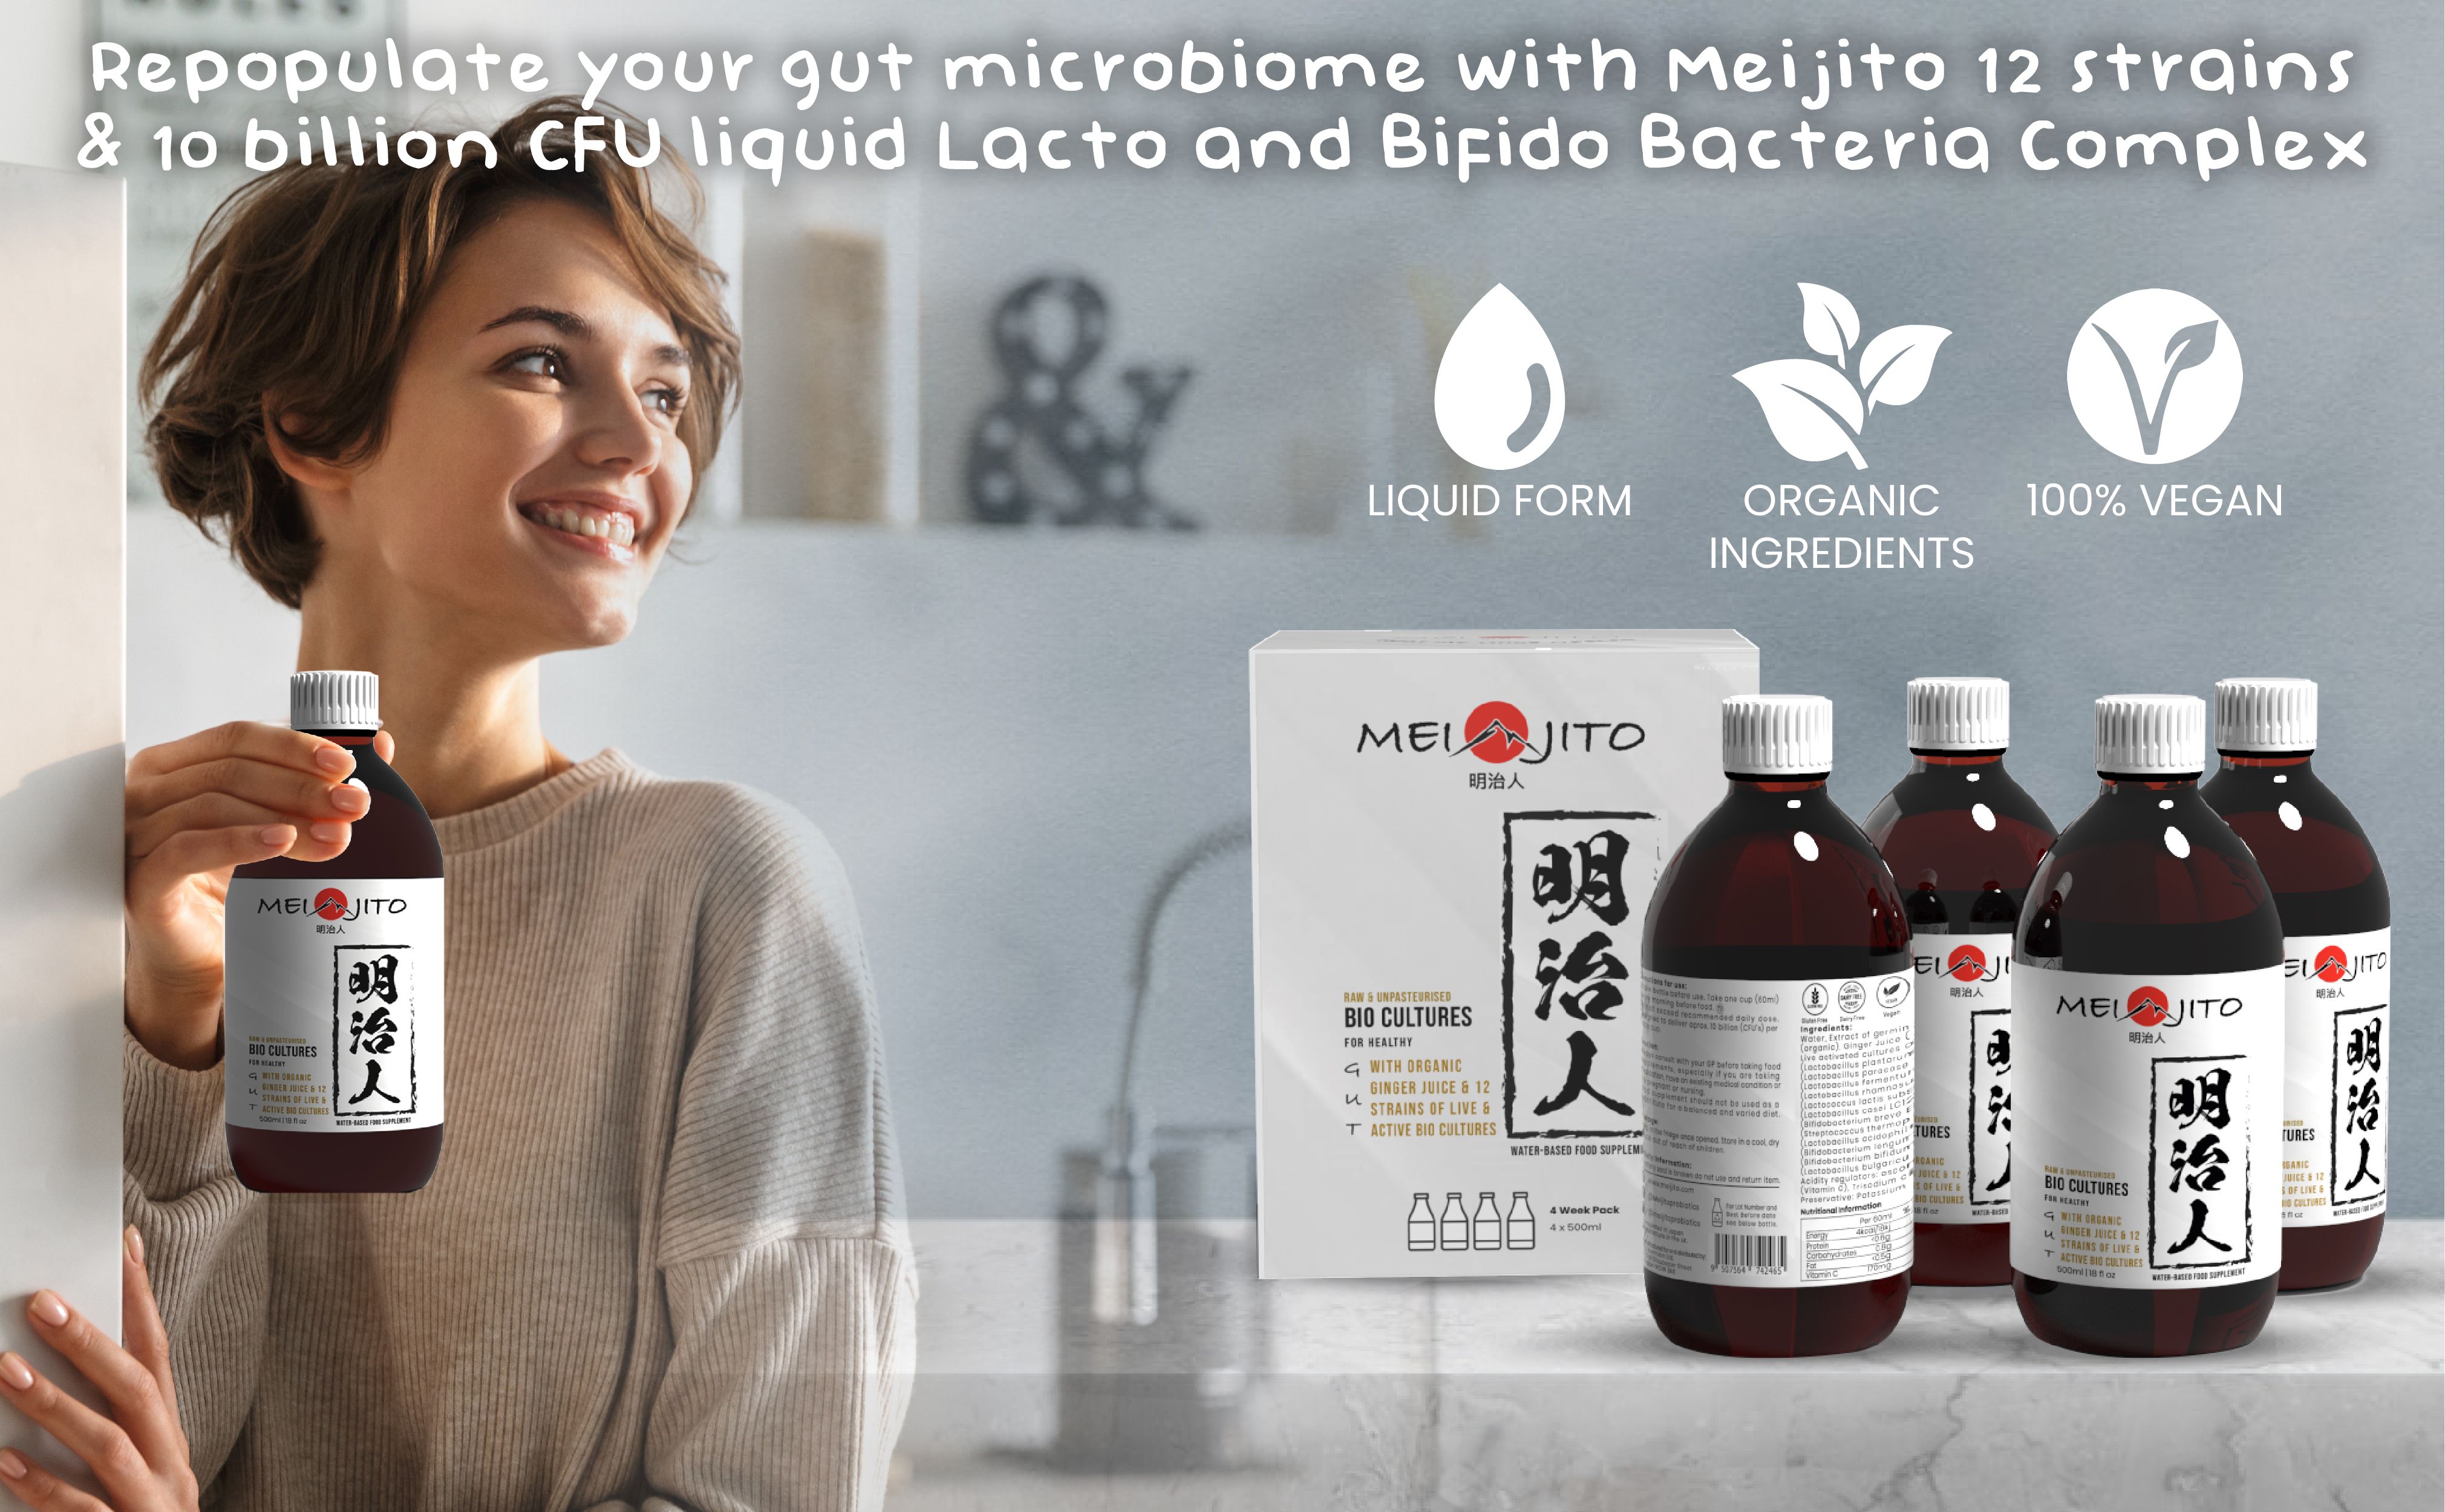 MEIJITO Water-Based Daily Probiotic Formula with Raw, Live and Active Bio Cultures 10 Billion (CFU) 4x500ml Pack - Advanced Liquid-Based Probiotics Complex